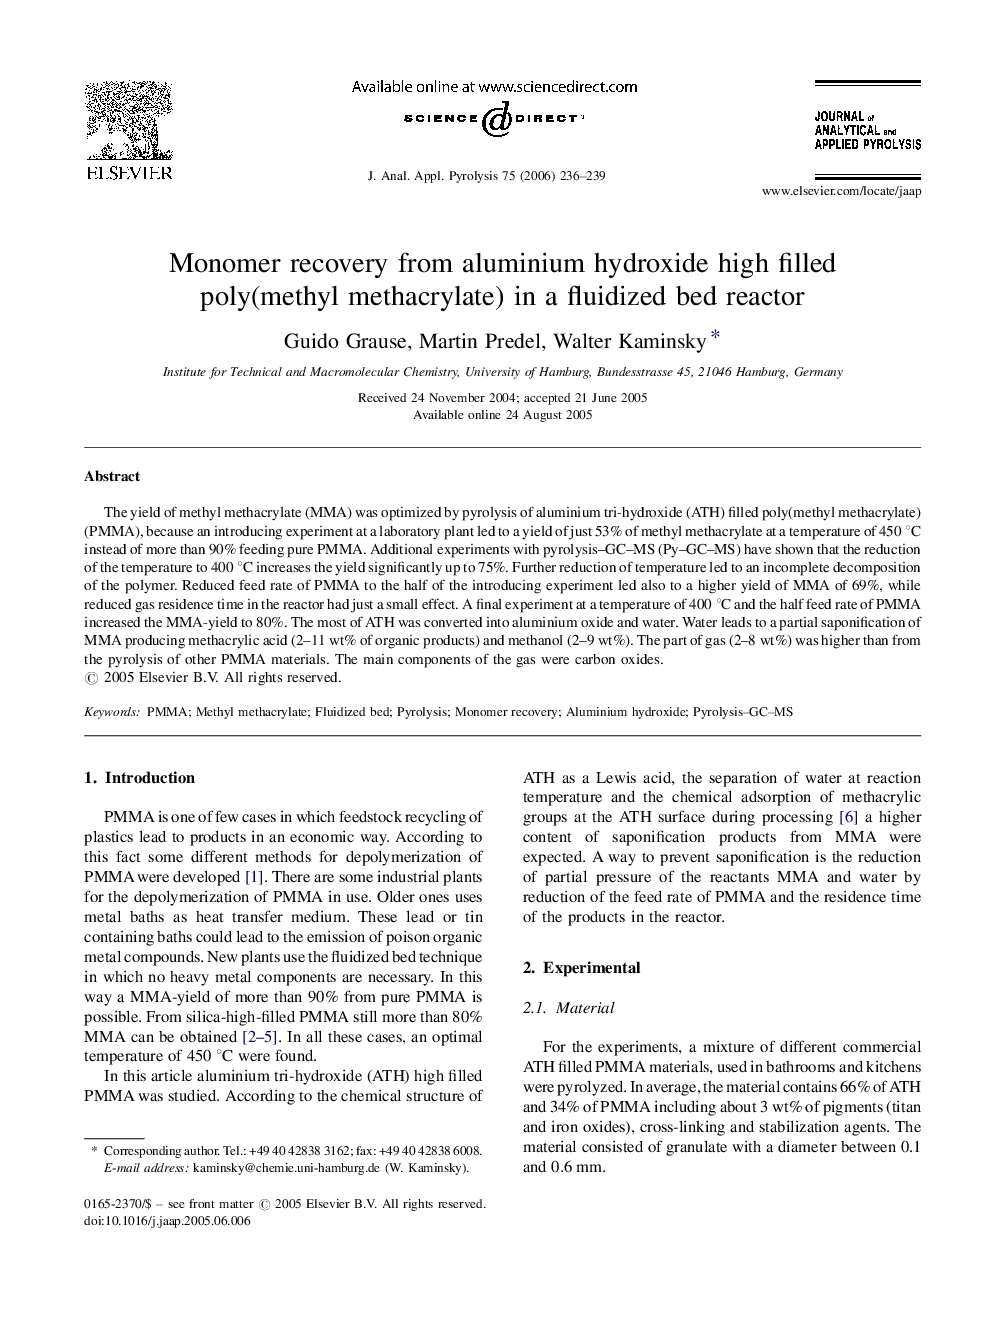 Monomer recovery from aluminium hydroxide high filled poly(methyl methacrylate) in a fluidized bed reactor